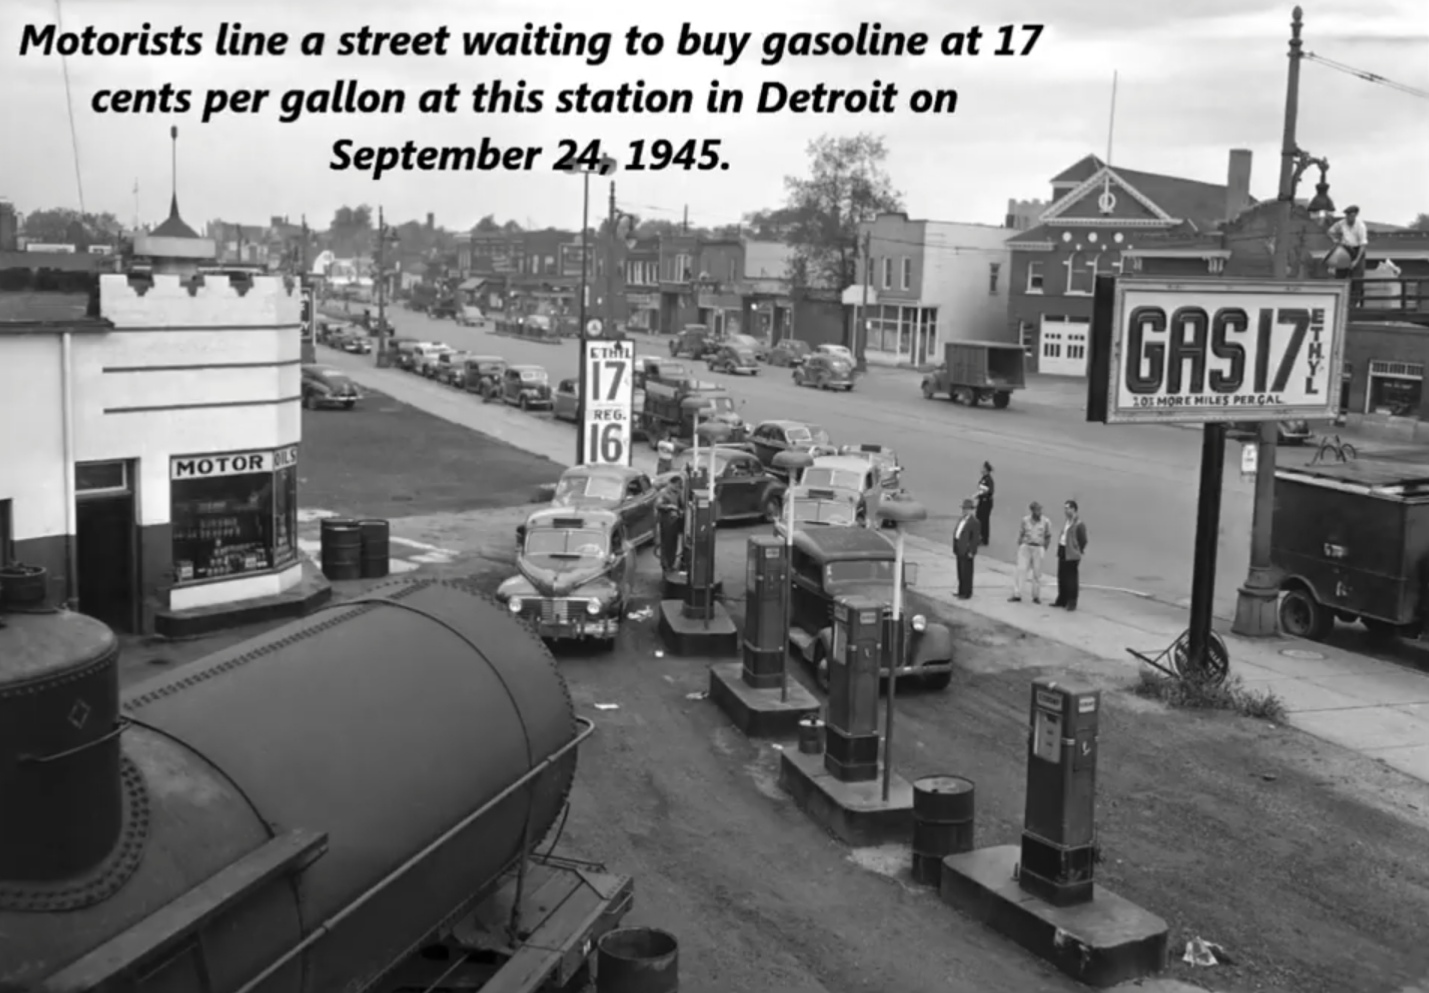 detroit in the 1940's - Motorists line a street waiting to buy gasoline at 17 cents per gallon at this station in Detroit on . E11 Sthl |_ GASI7. 201 More Niles Per Cal Reg Motor Oils